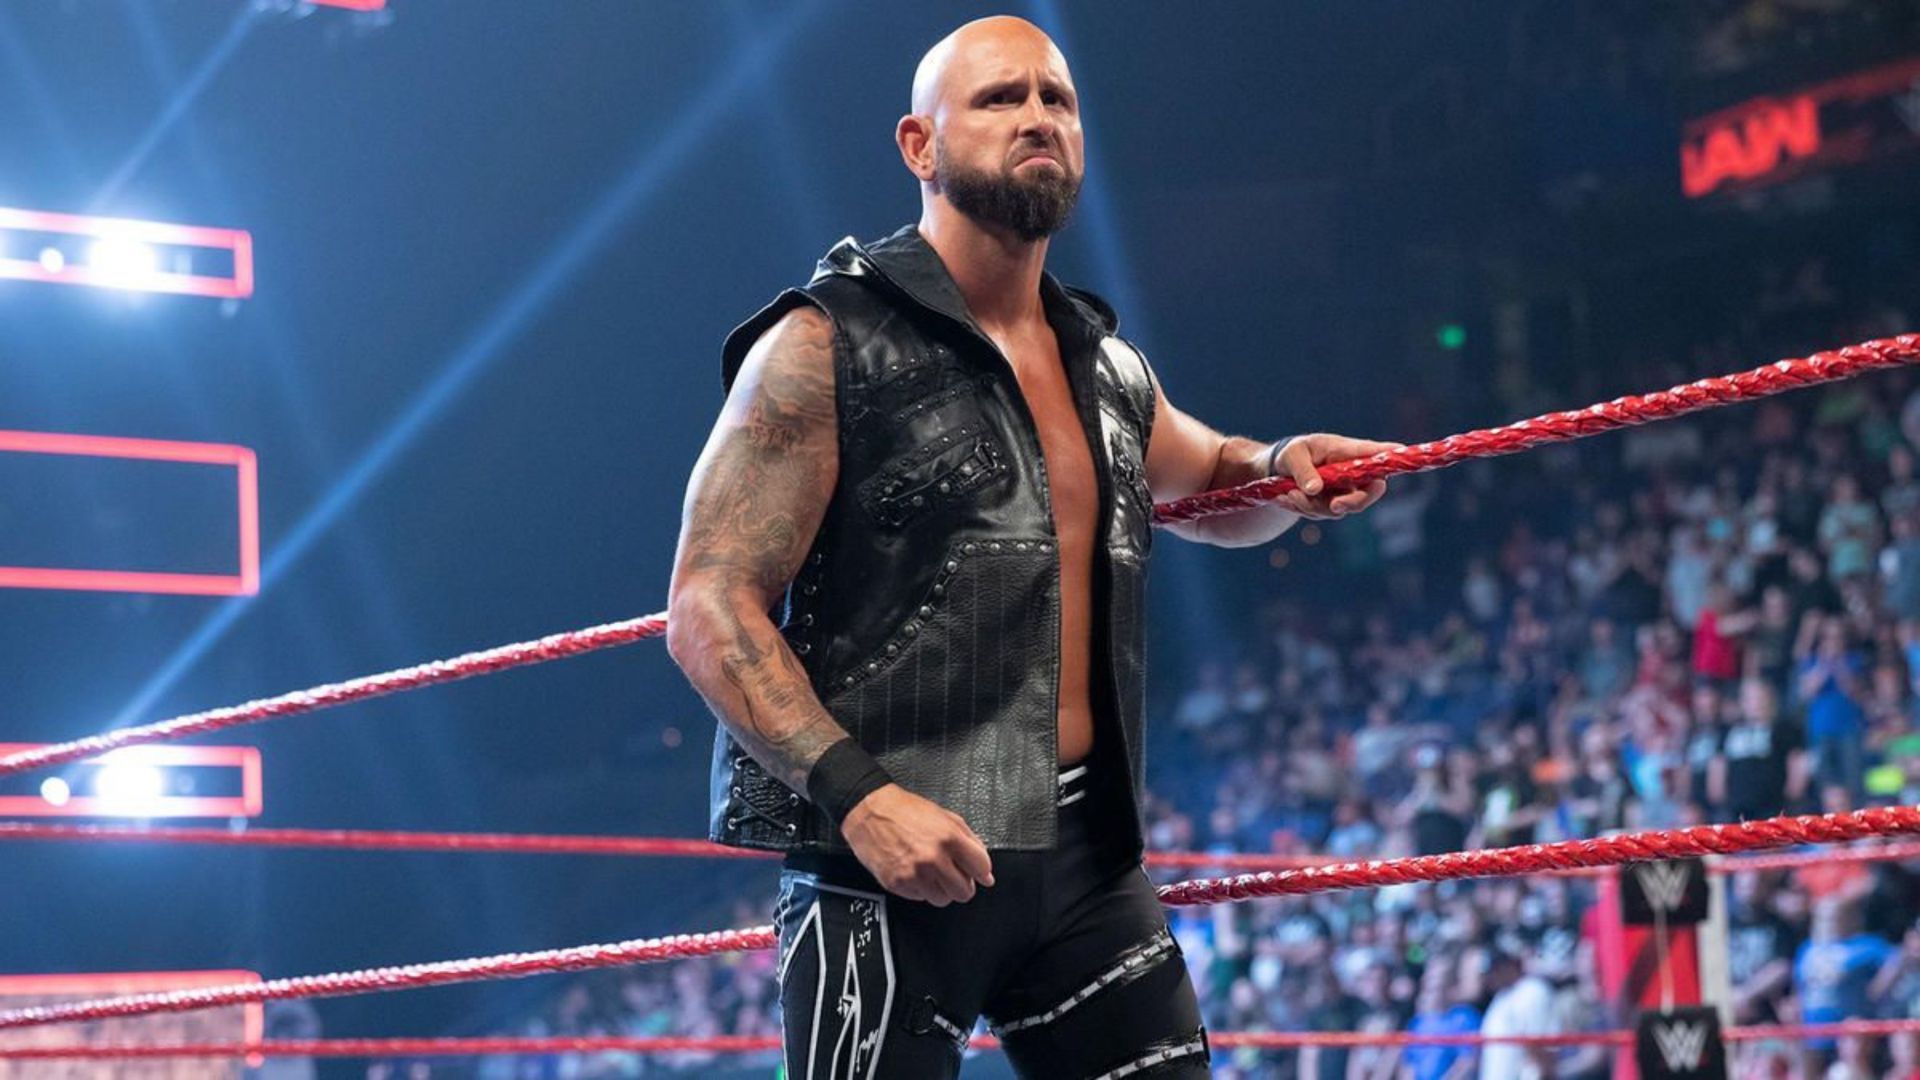 Karl Anderson got released from WWE in 2020